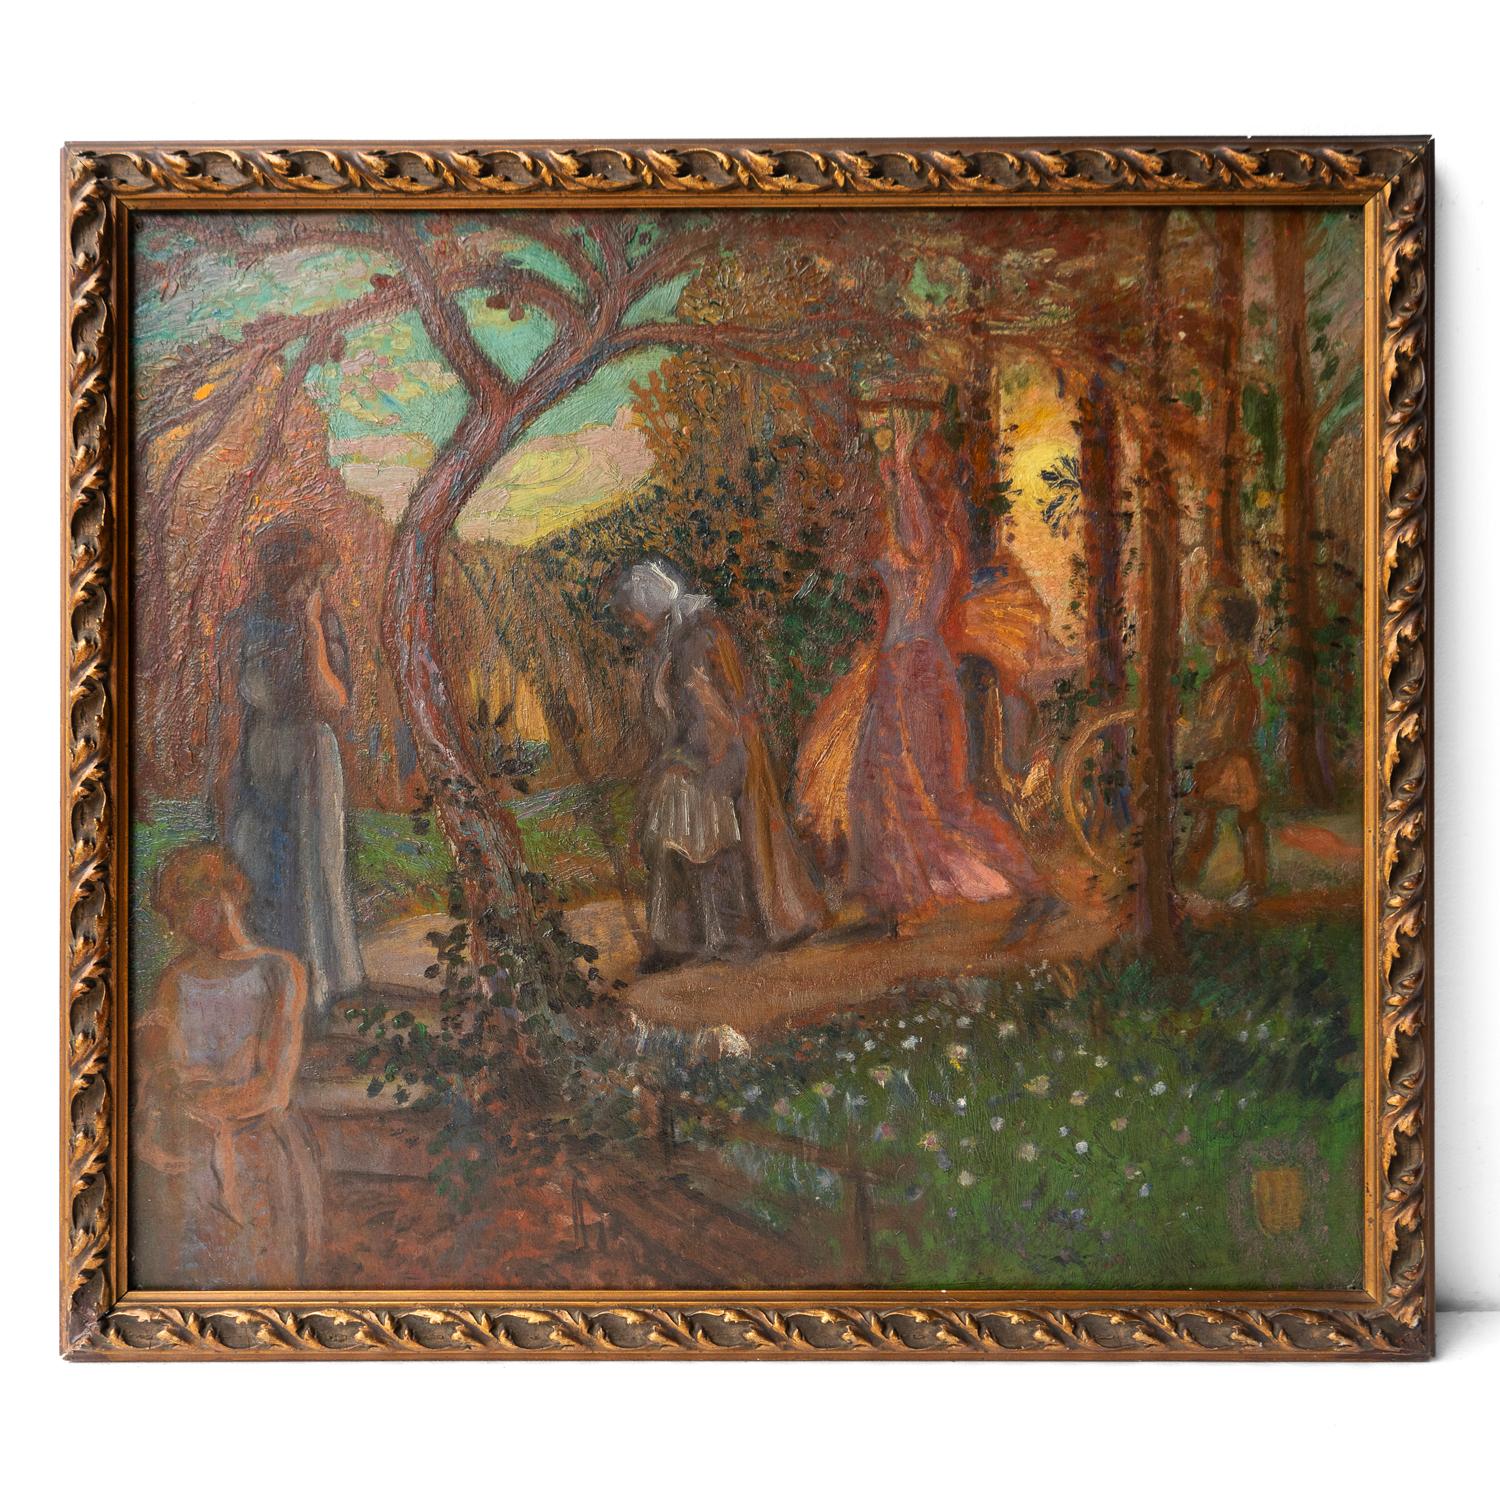 Antique oil on board painting by James Joshua Guthrie (1874-1952).

An extremely romantic image depicting various figures of different ages walking a path through the woods at sunset. Probably in Flansham, West Sussex.

The artist has really managed